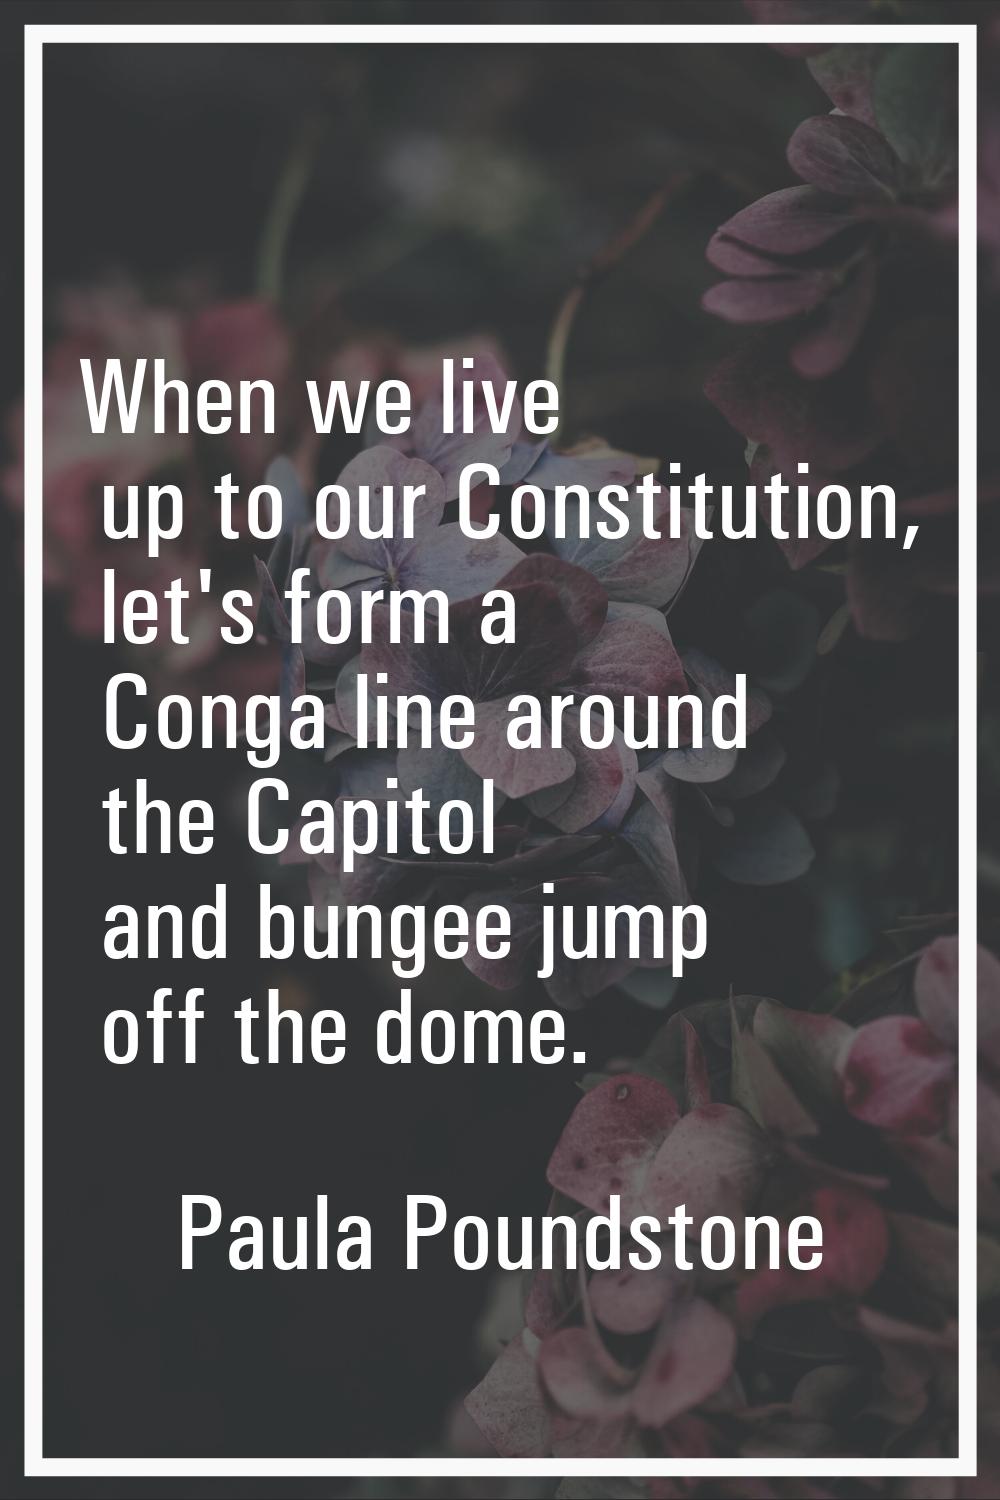 When we live up to our Constitution, let's form a Conga line around the Capitol and bungee jump off